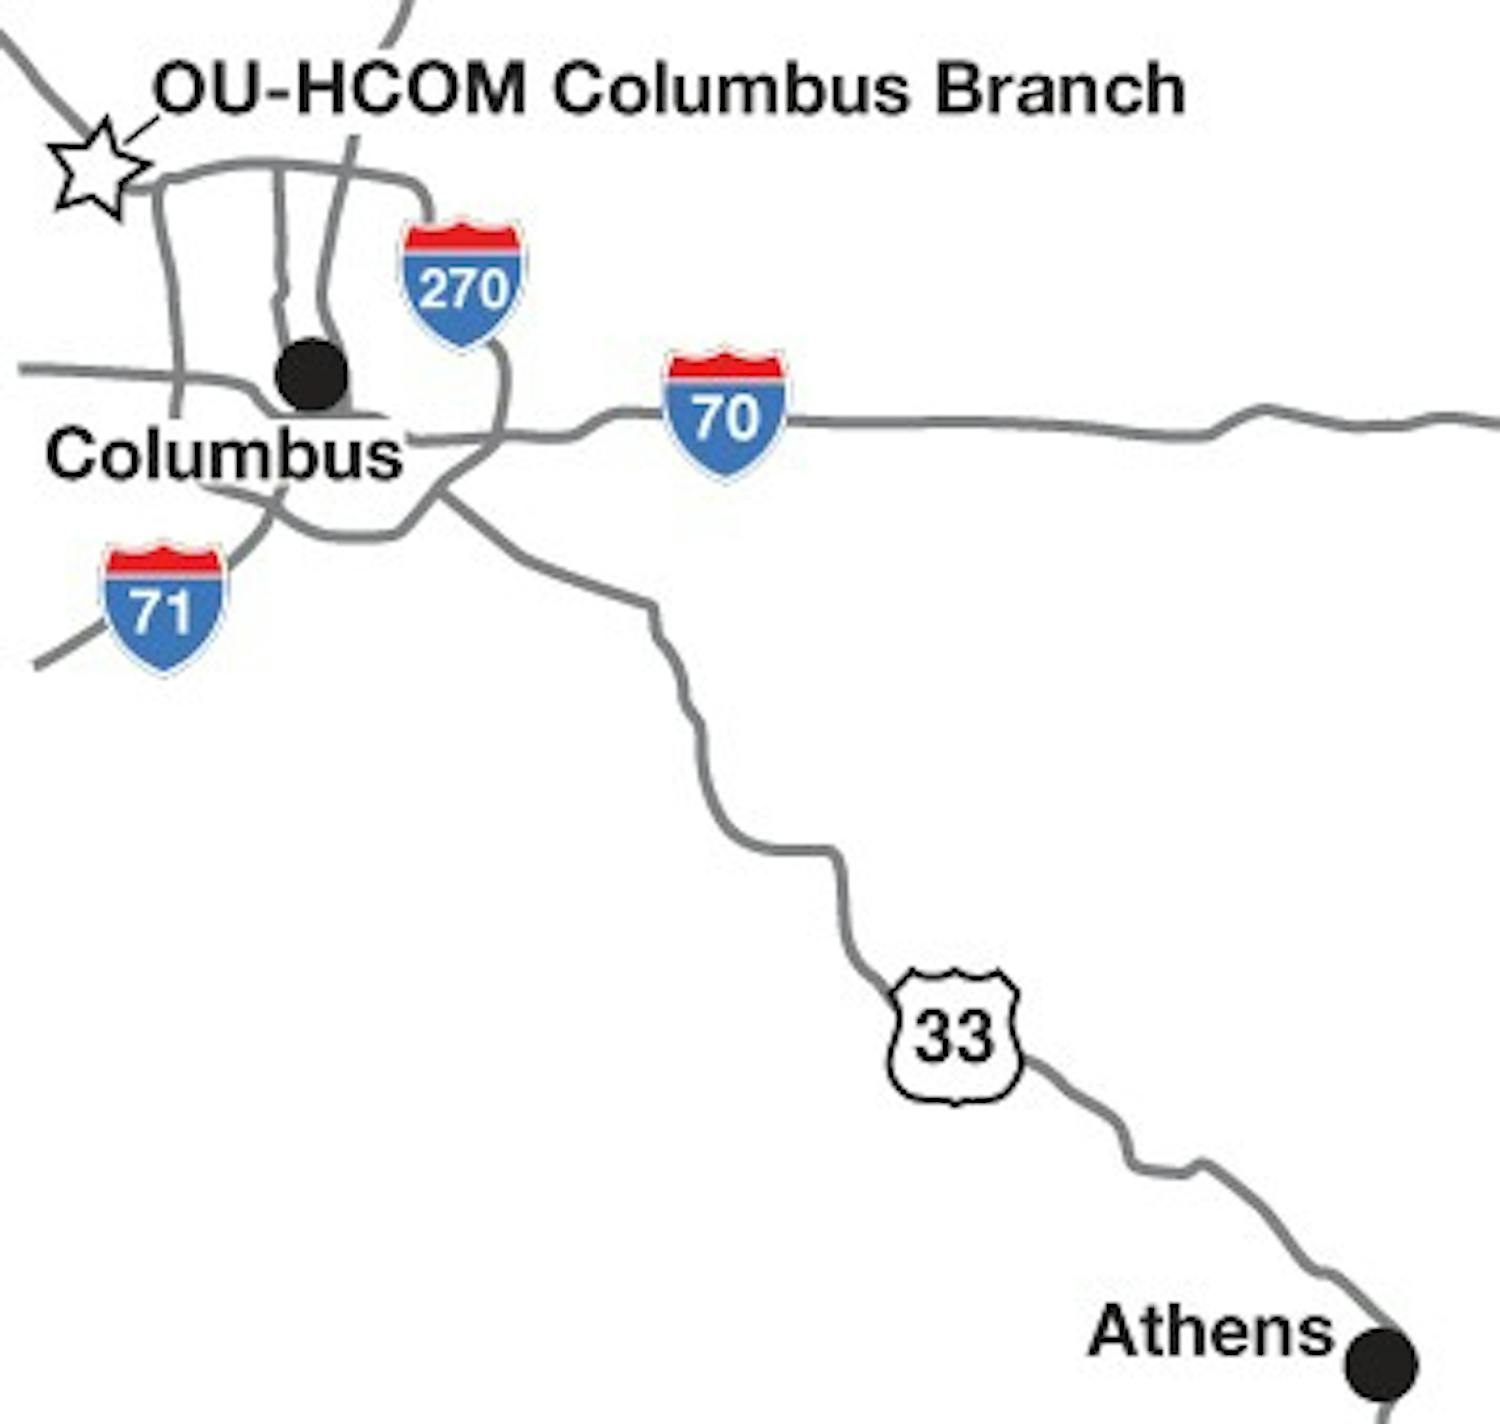 OU-HCOM past latest hurdle in opening Columbus branch  